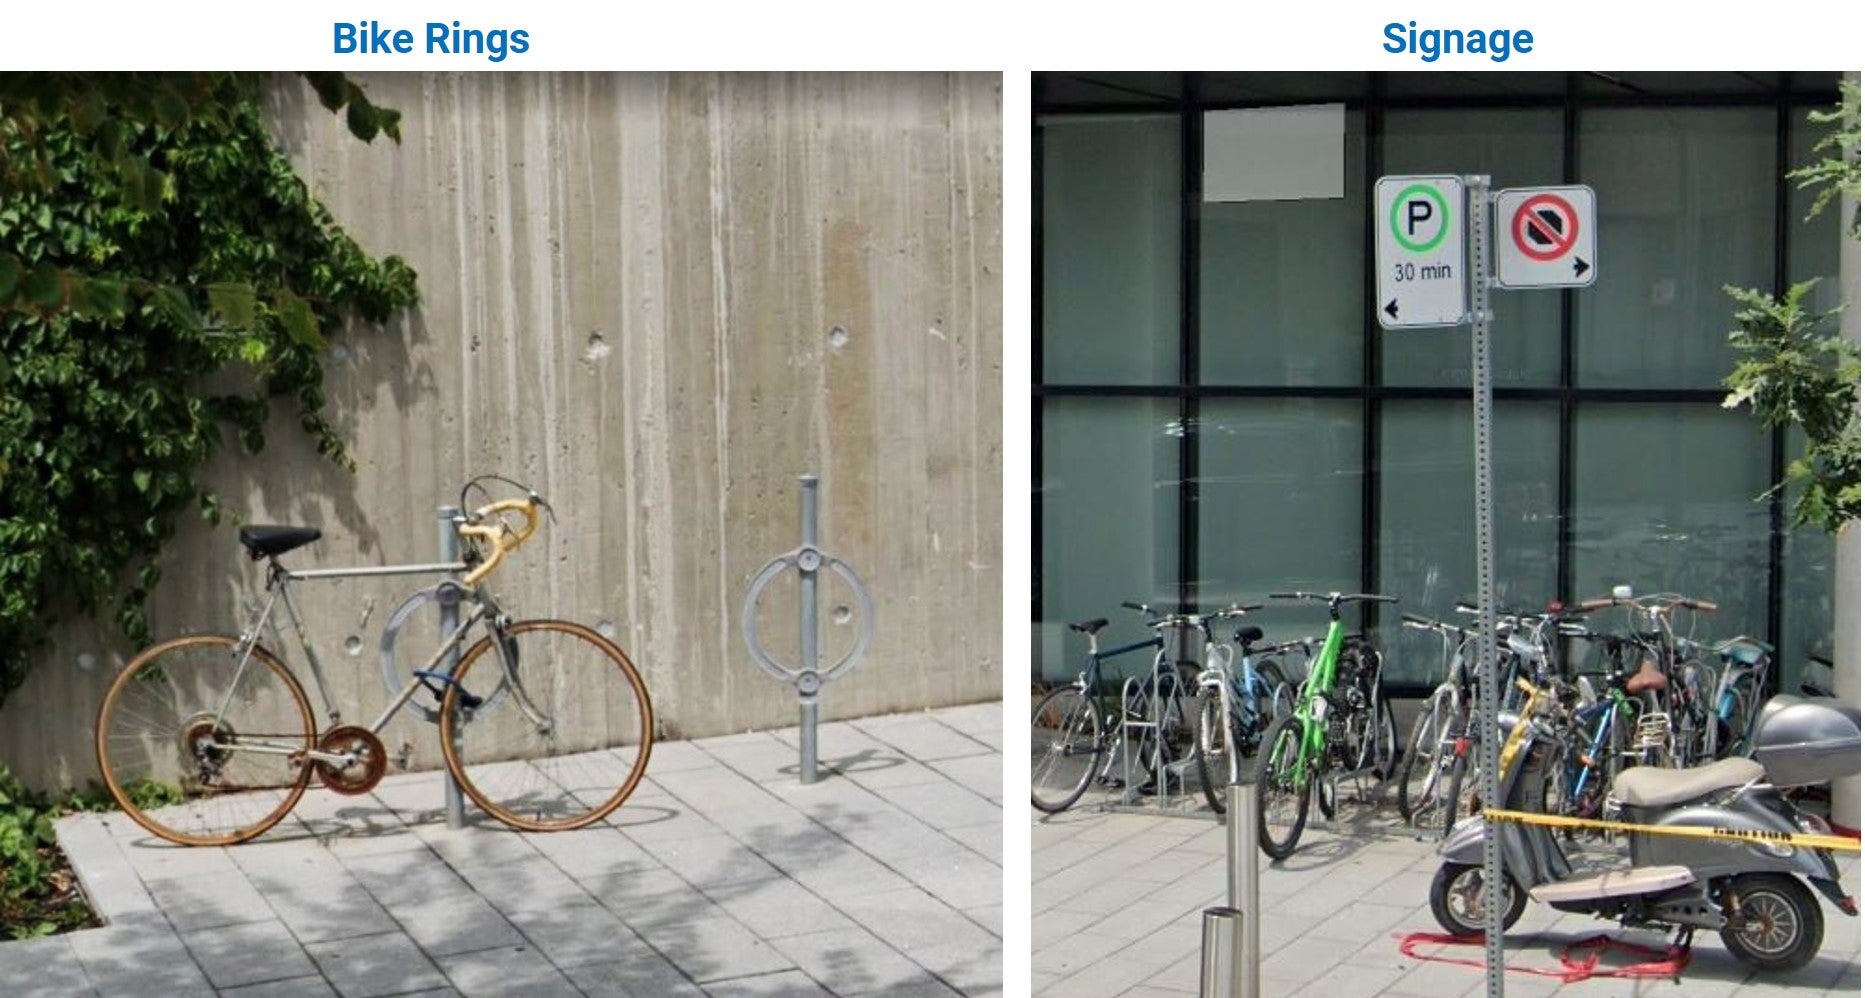 Bike rings and signage